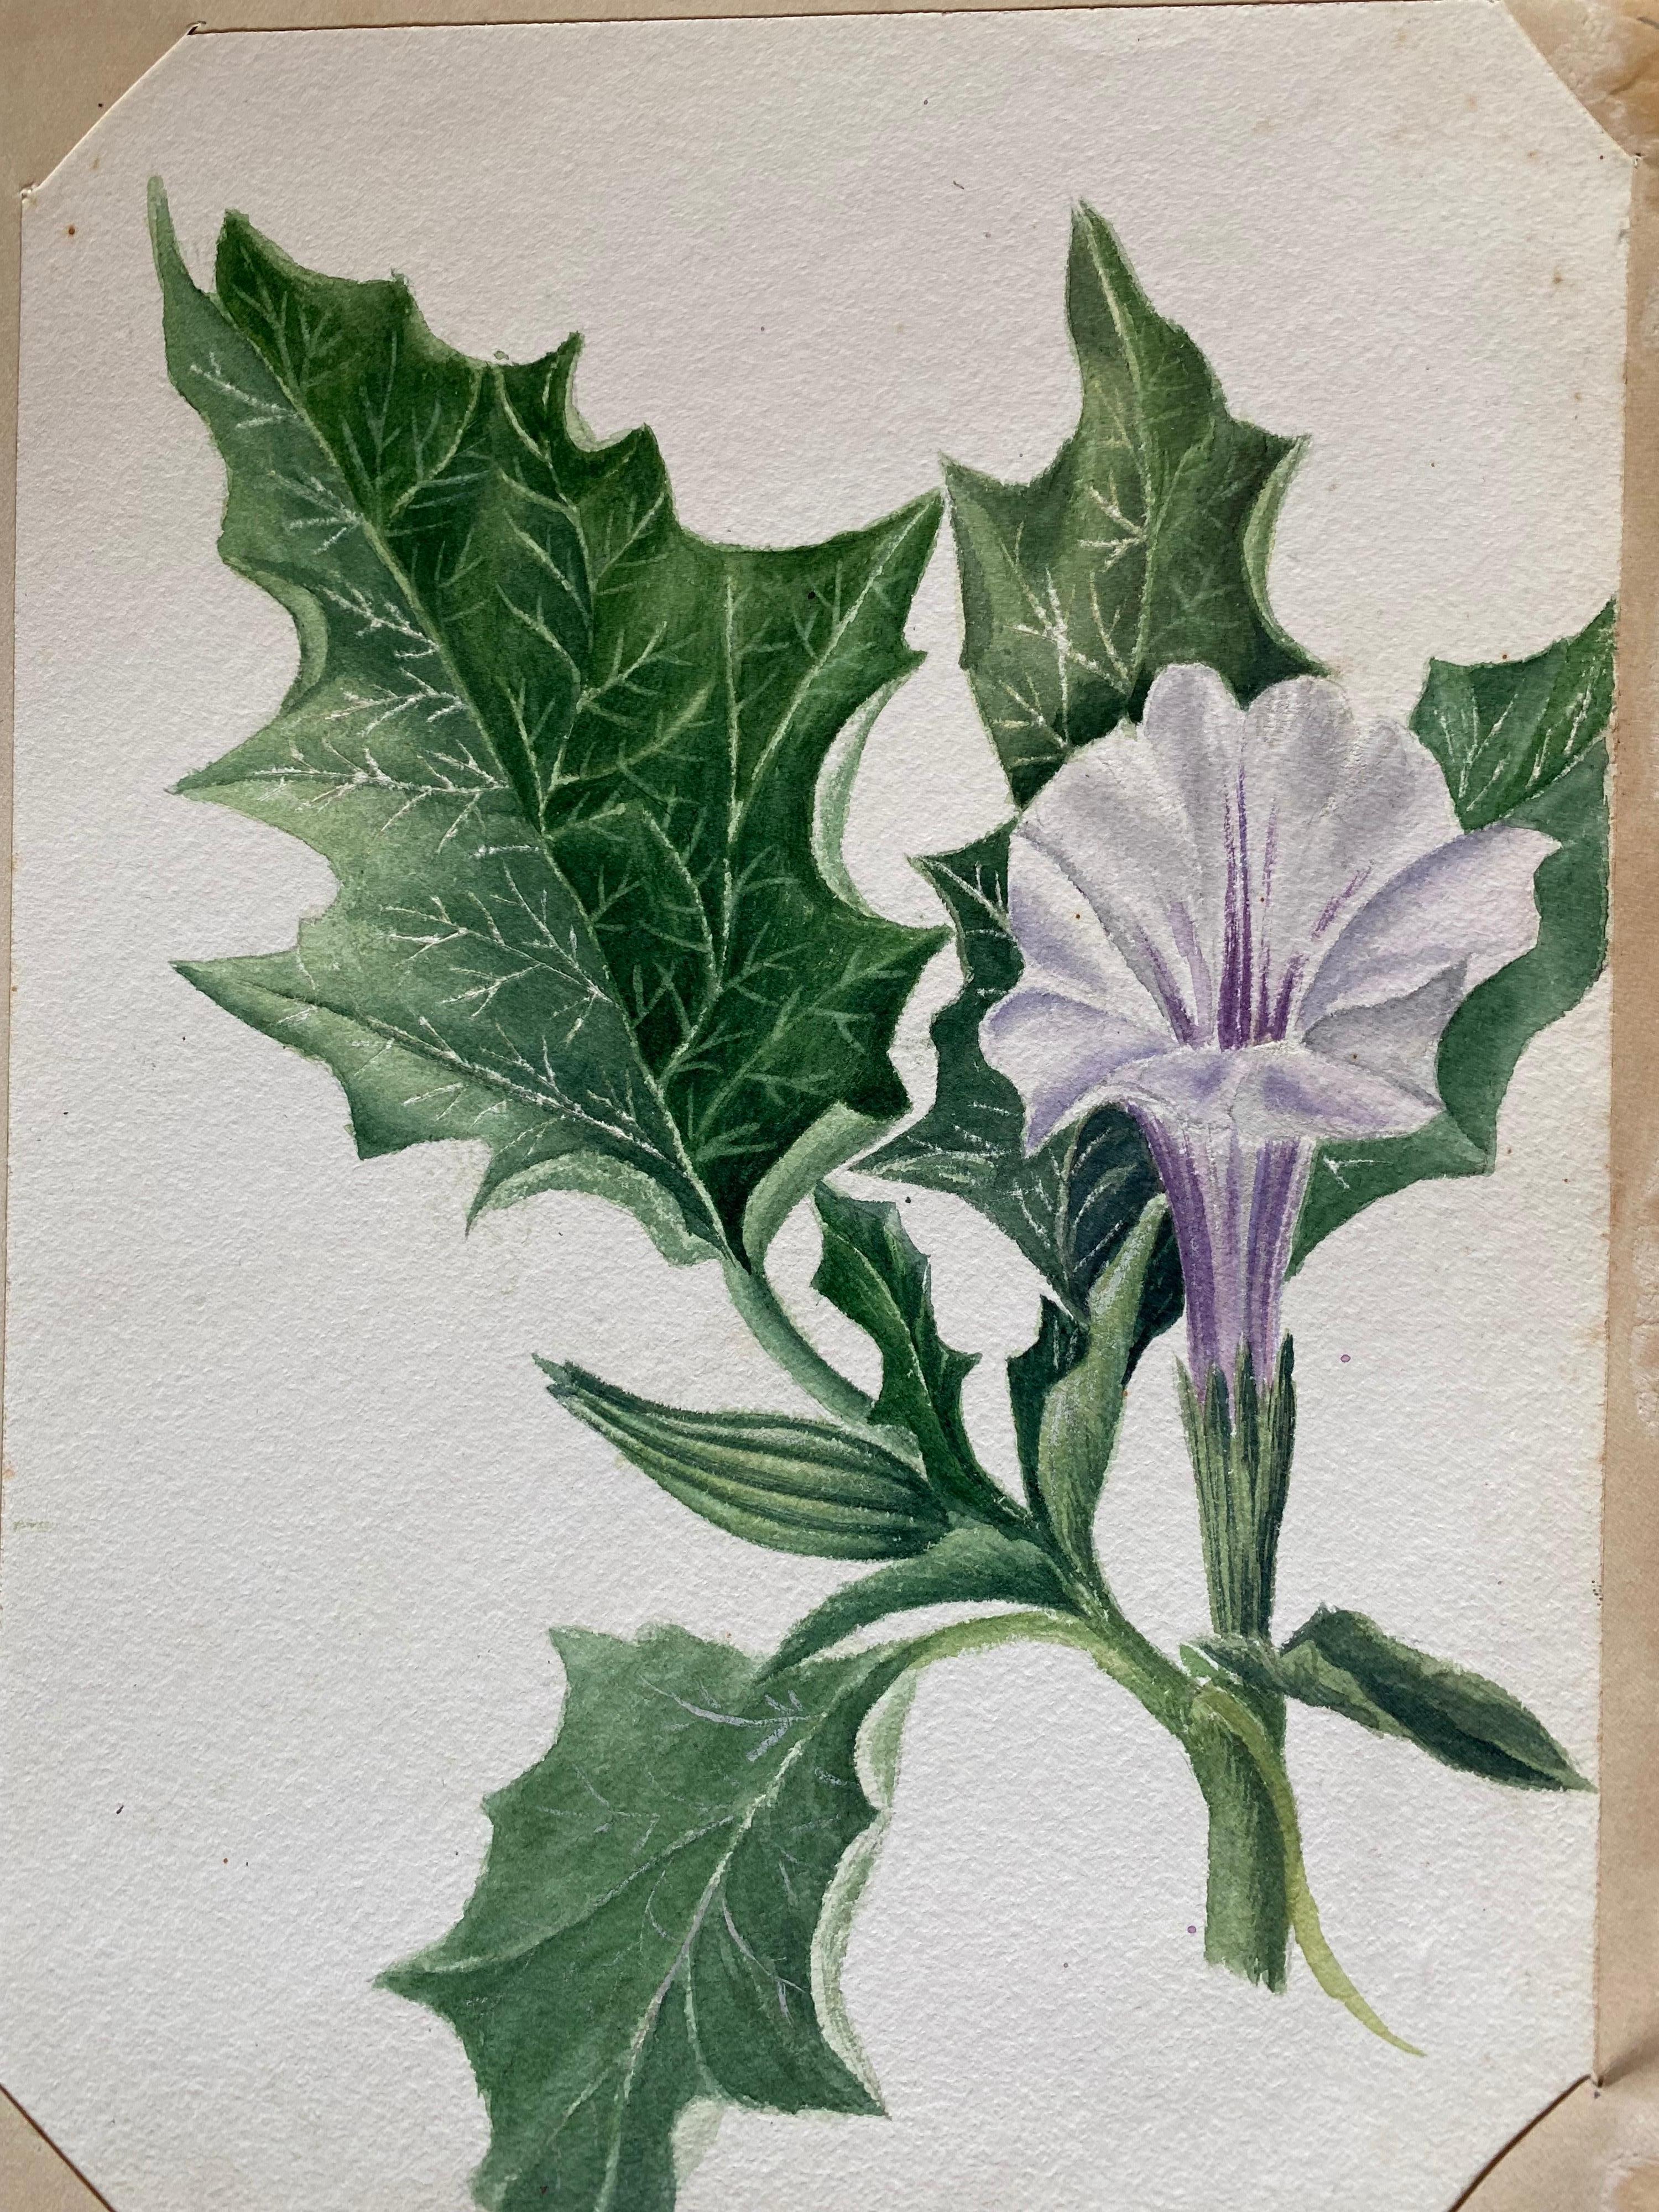 Two very fine original antique English botanical watercolour paintings depicting these beautiful depictions of flower/ plant. The works came to us from a private collection in Surrey, England and had been part of an album of works assembled by the